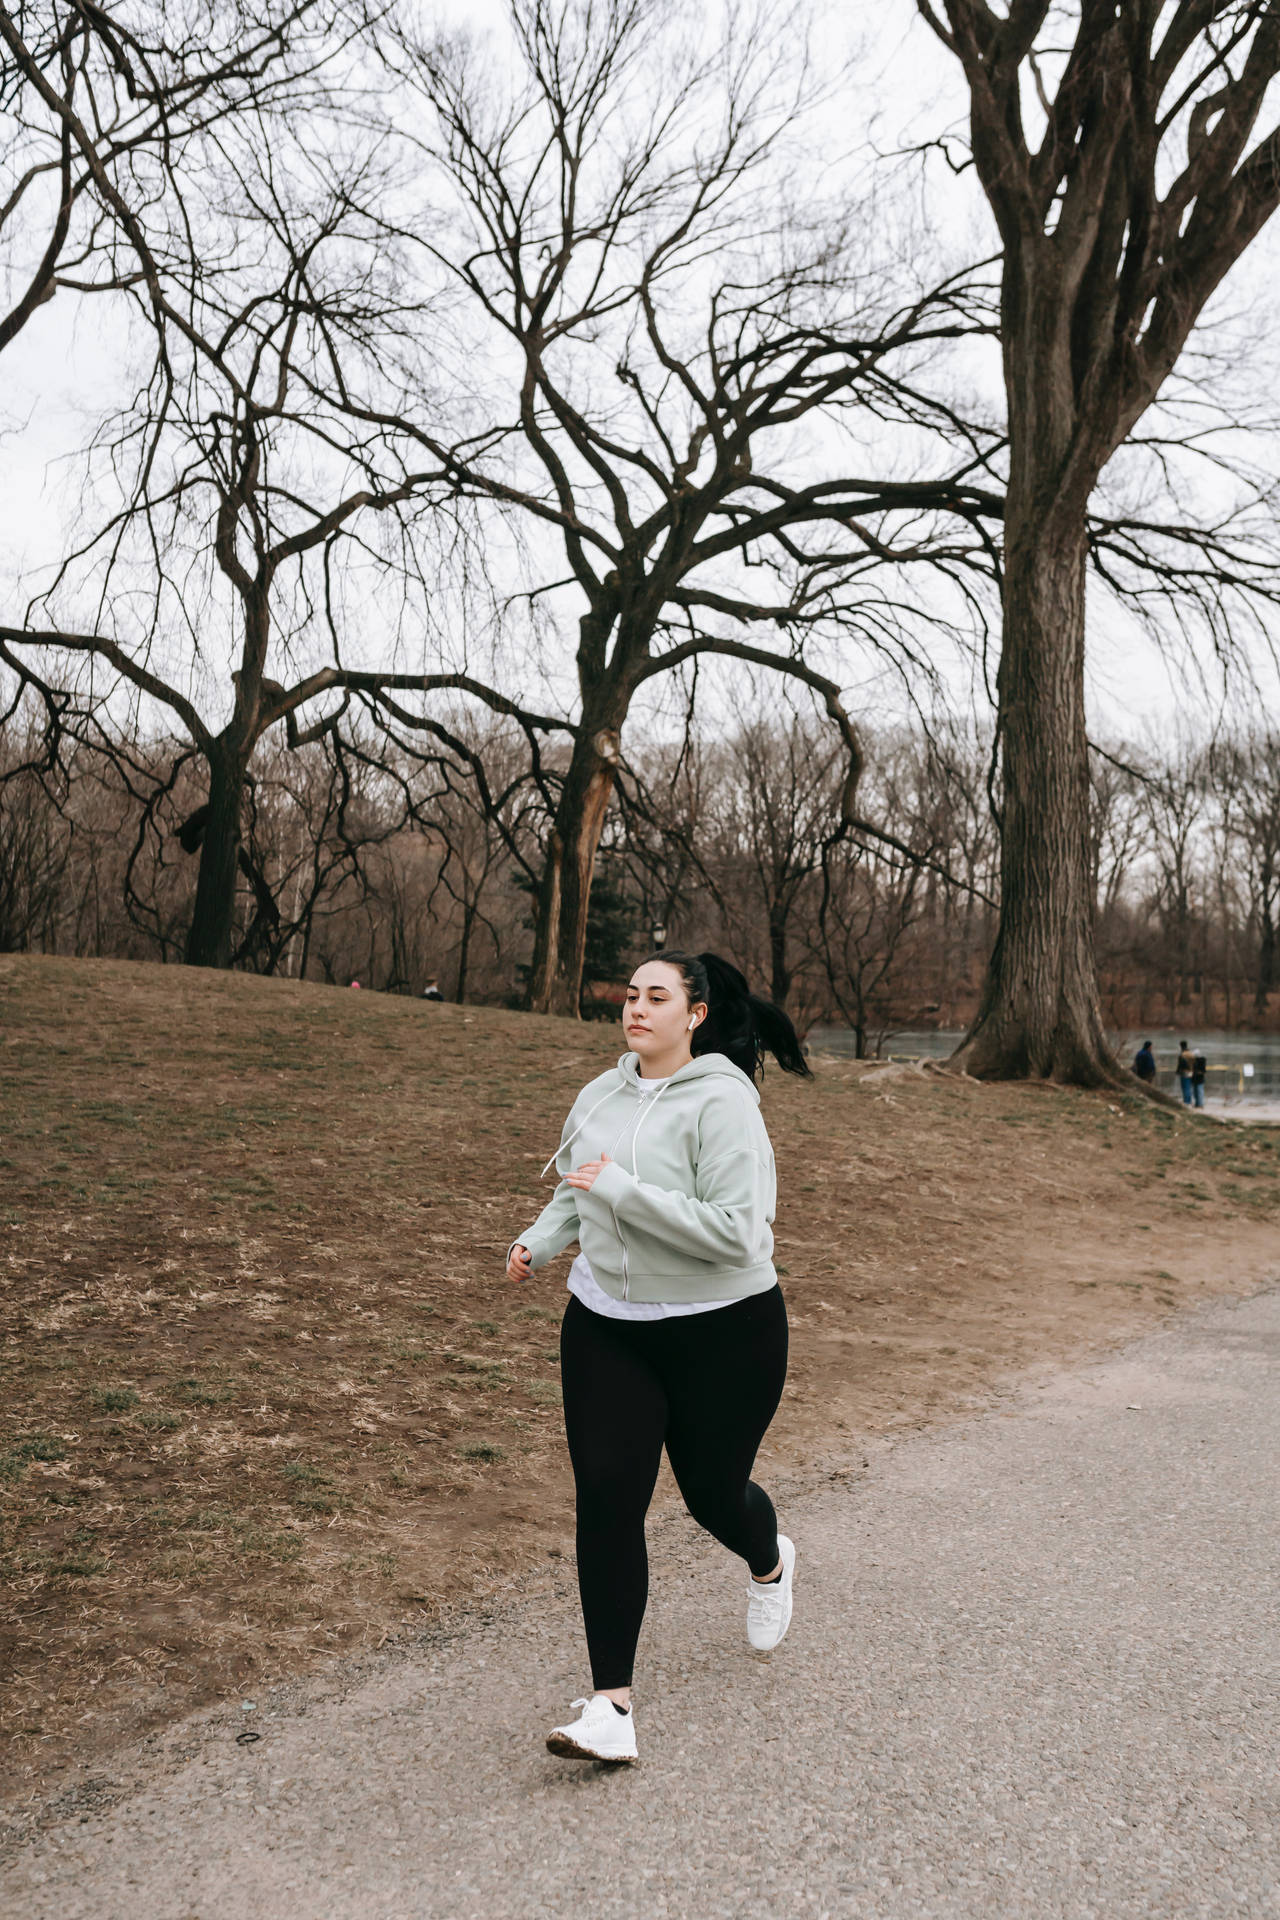 Fat Woman Jogging Background